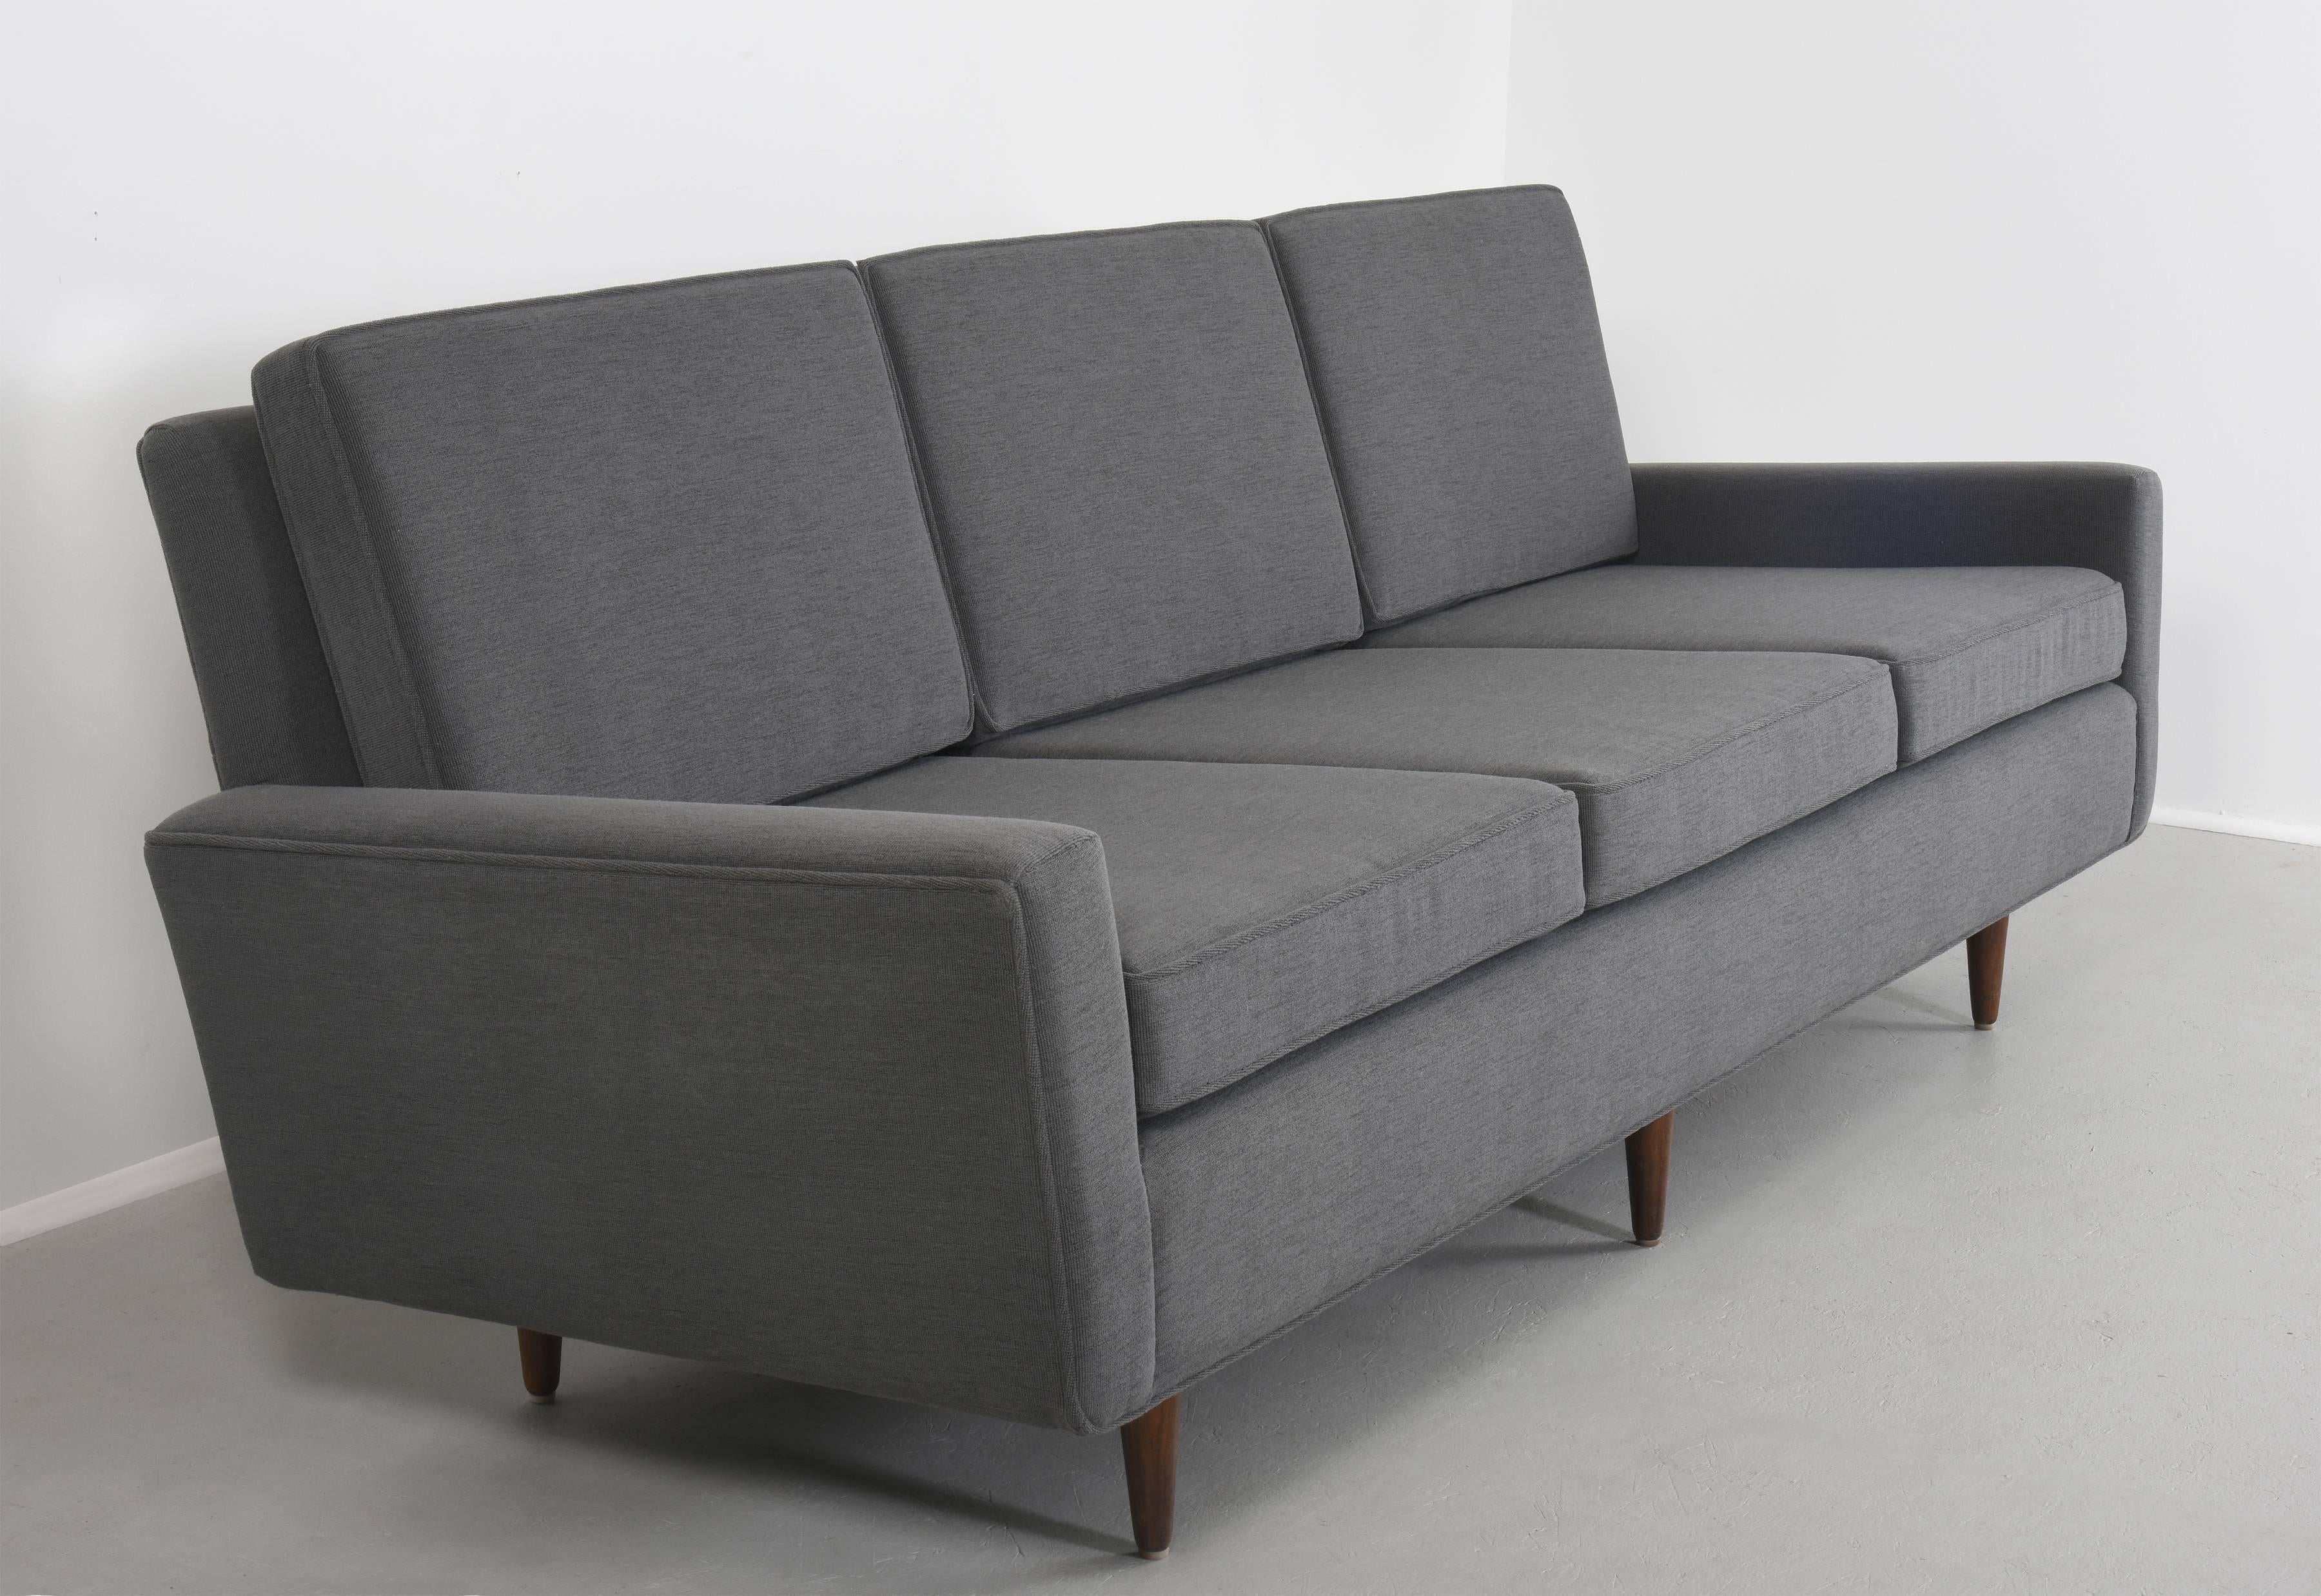 Florence Knoll sofa three-seat sofa with birch base
Model 26 circa 1947

Matched pair available from single estate ownership

Measures
32 H x 90 W x 32 D inches 
height includes cushions

Dark blue upholstery with birch base
 